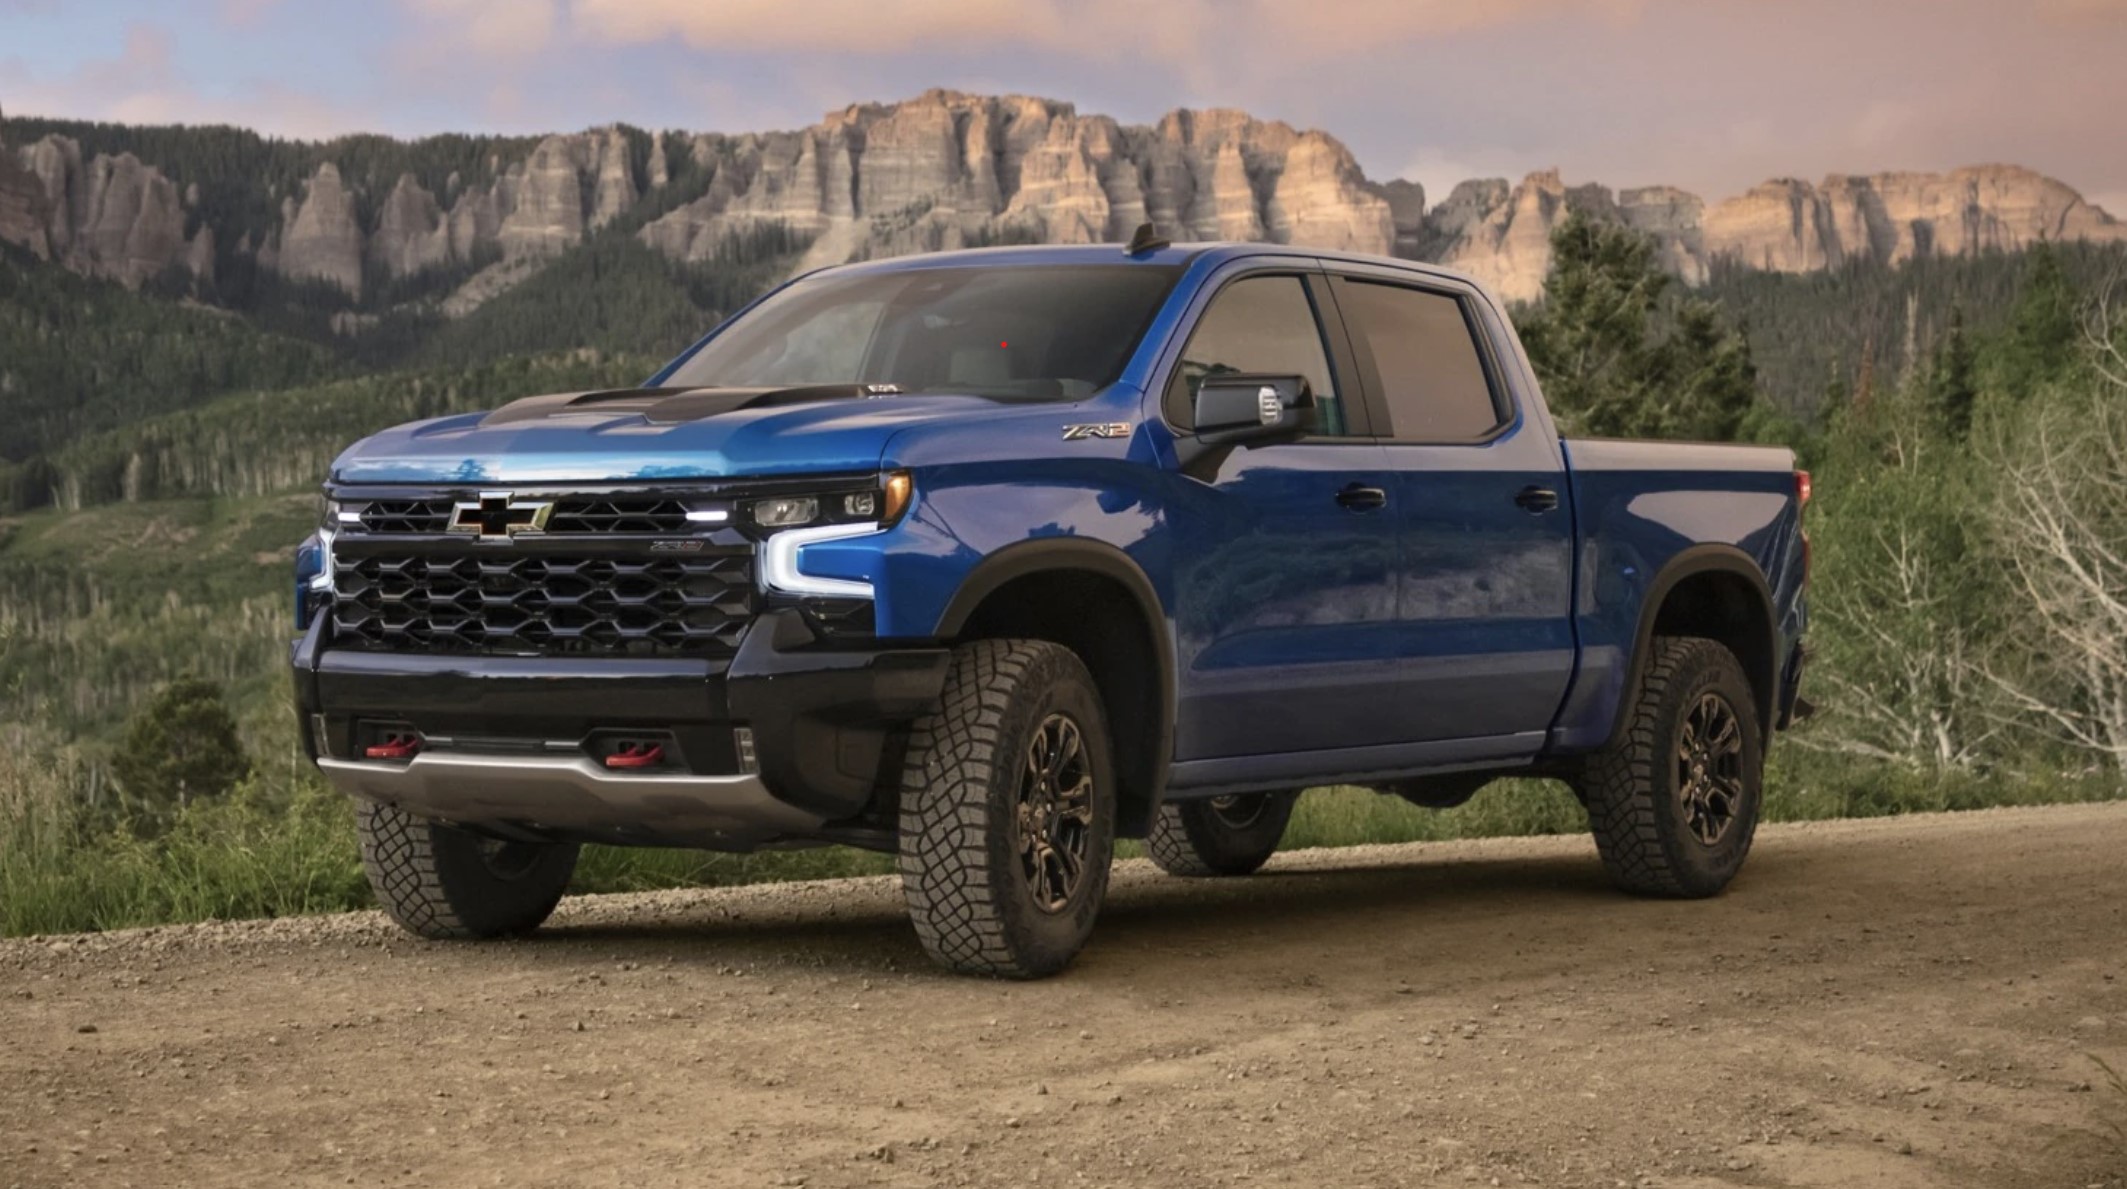 The 2023 Chevy Silverado off-roading on a dirt trail